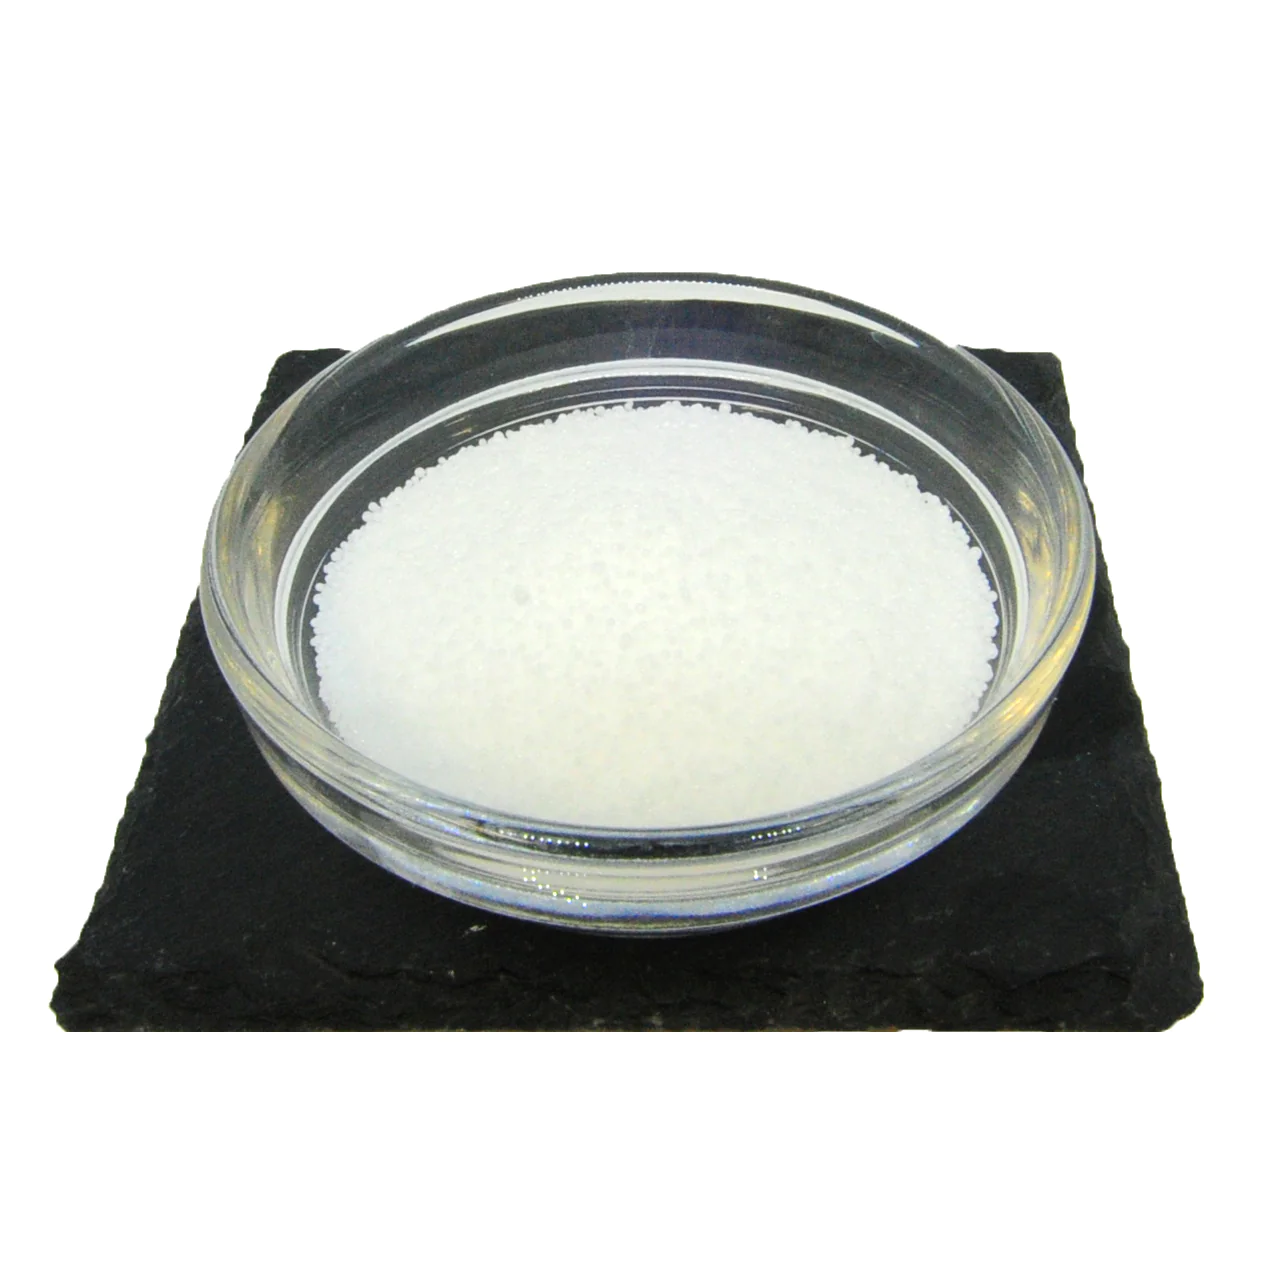 Stearic Acid (C18 32% - 39%) in Chemtradeasia